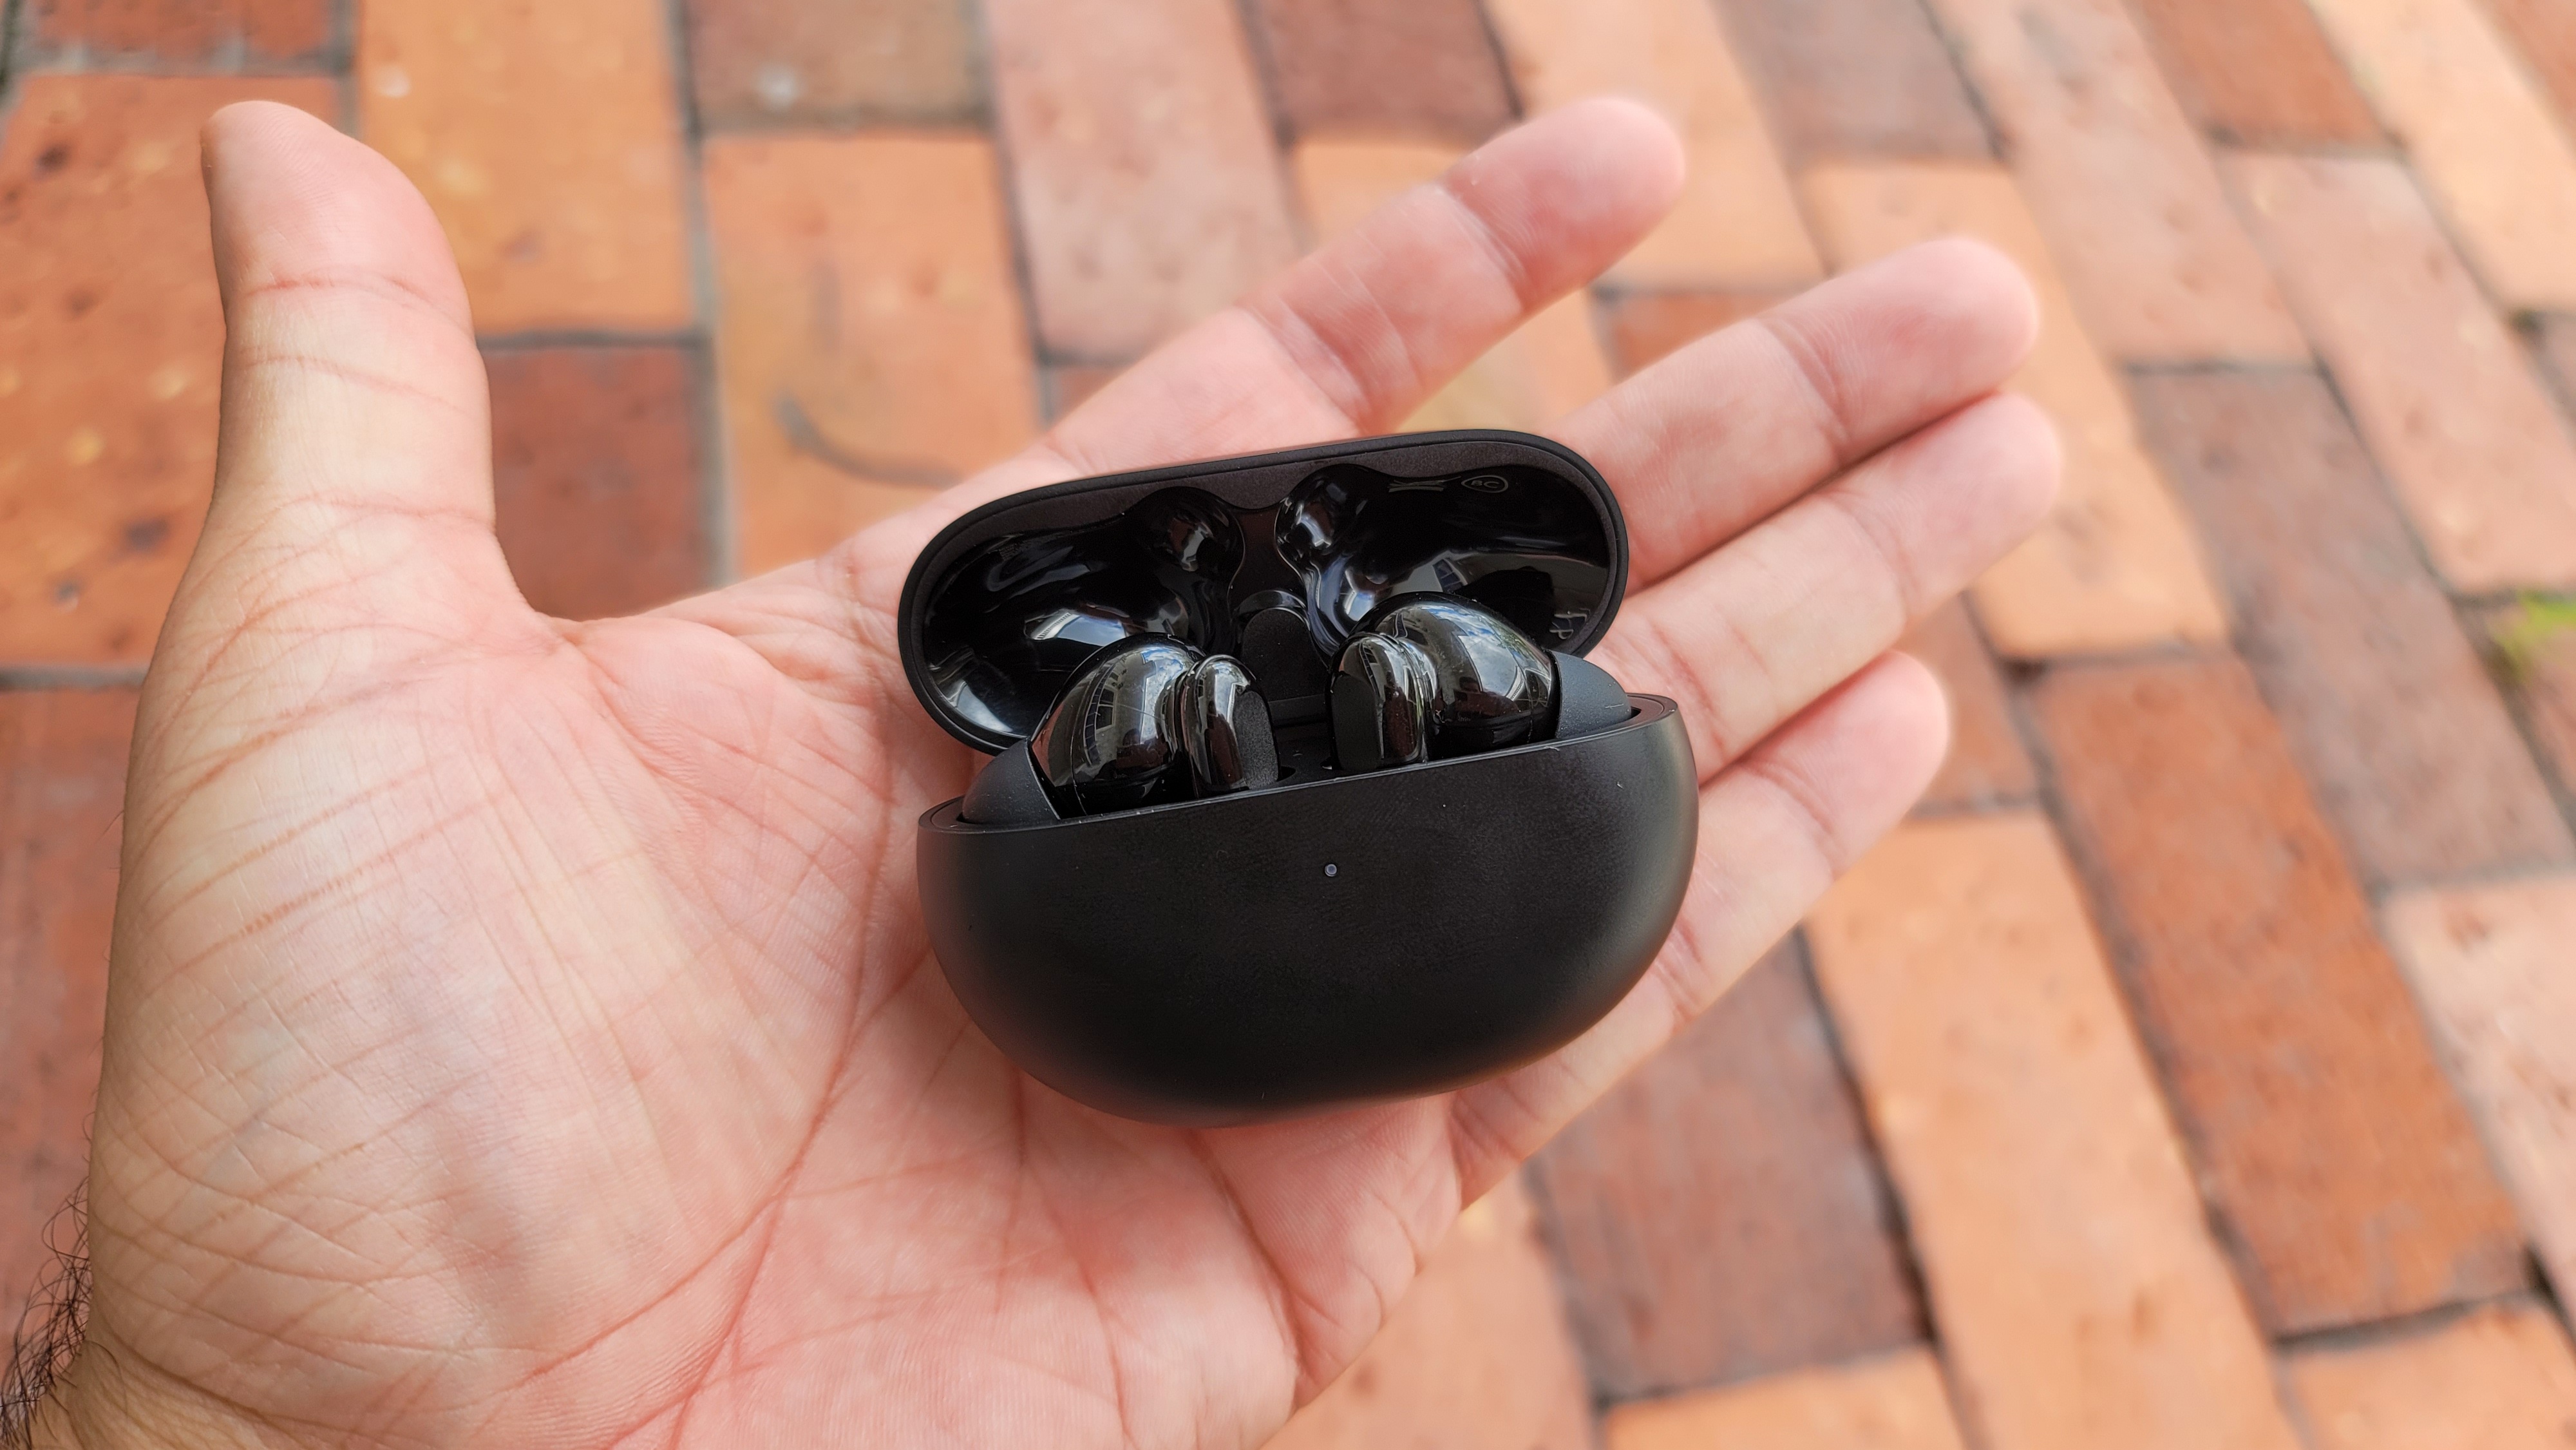 Samsung Galaxy Buds 2 review: nailing the basics with style - The